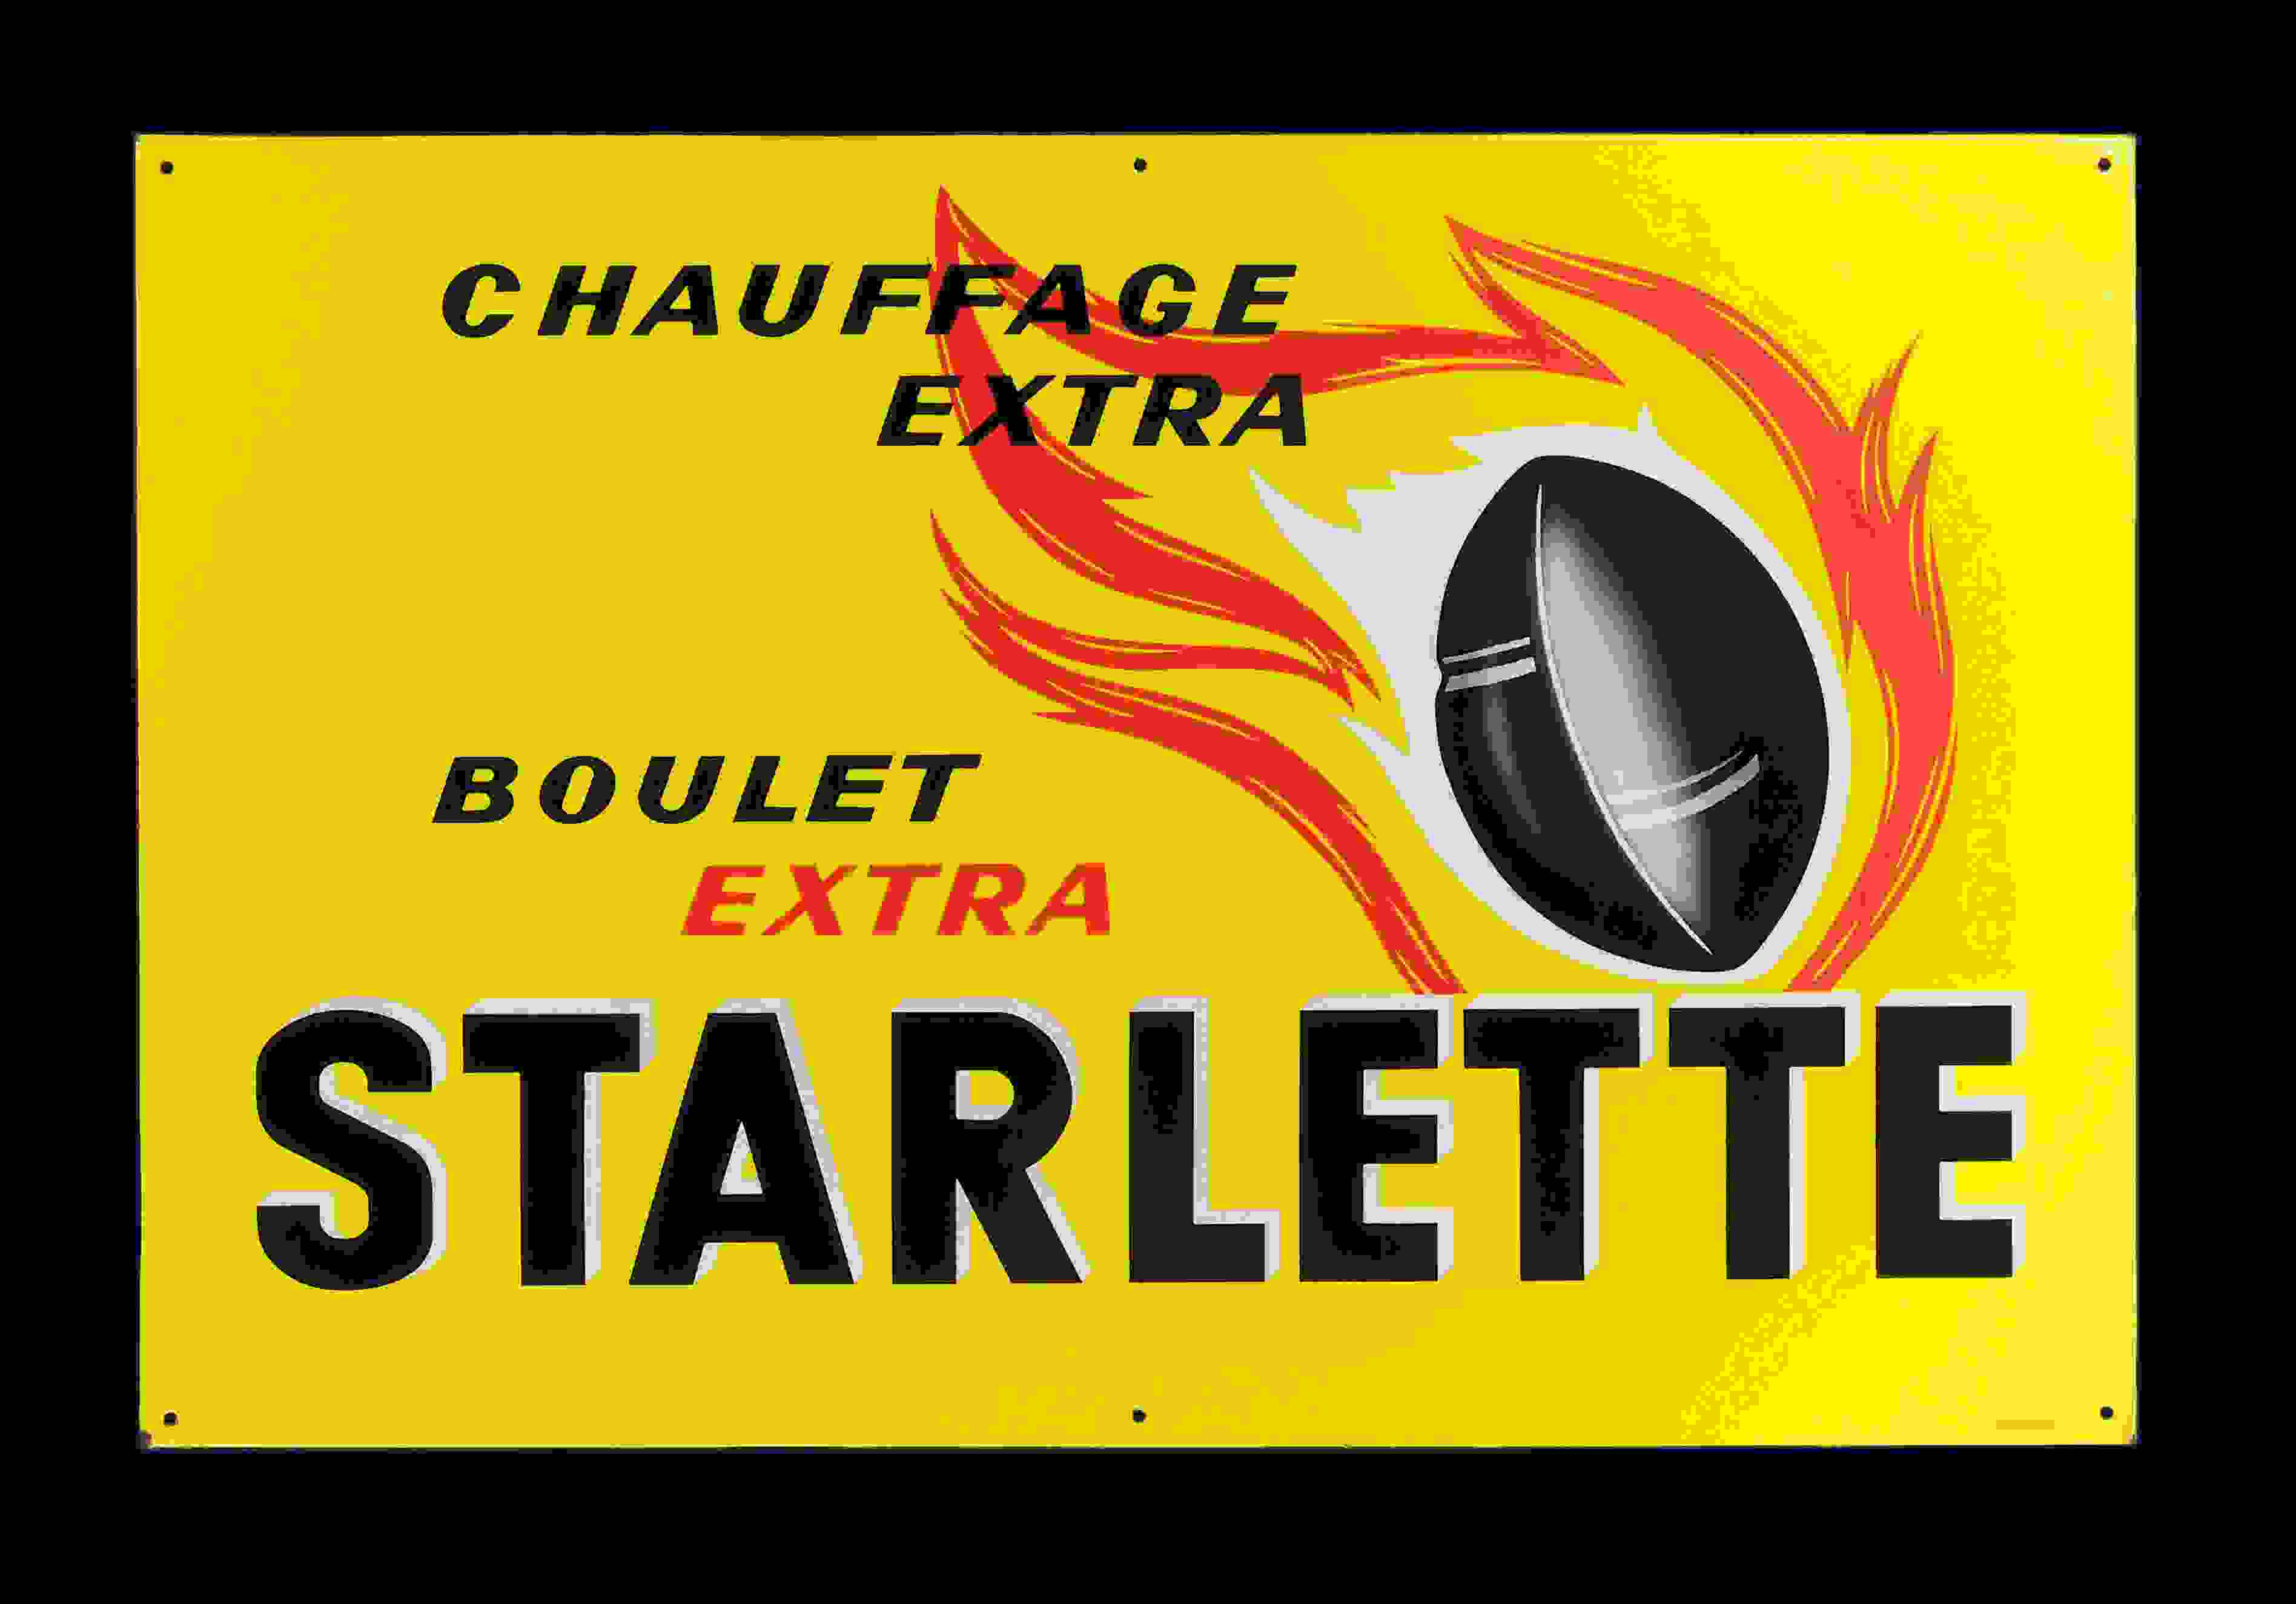 Starlette Chauffage Boulet Extra 